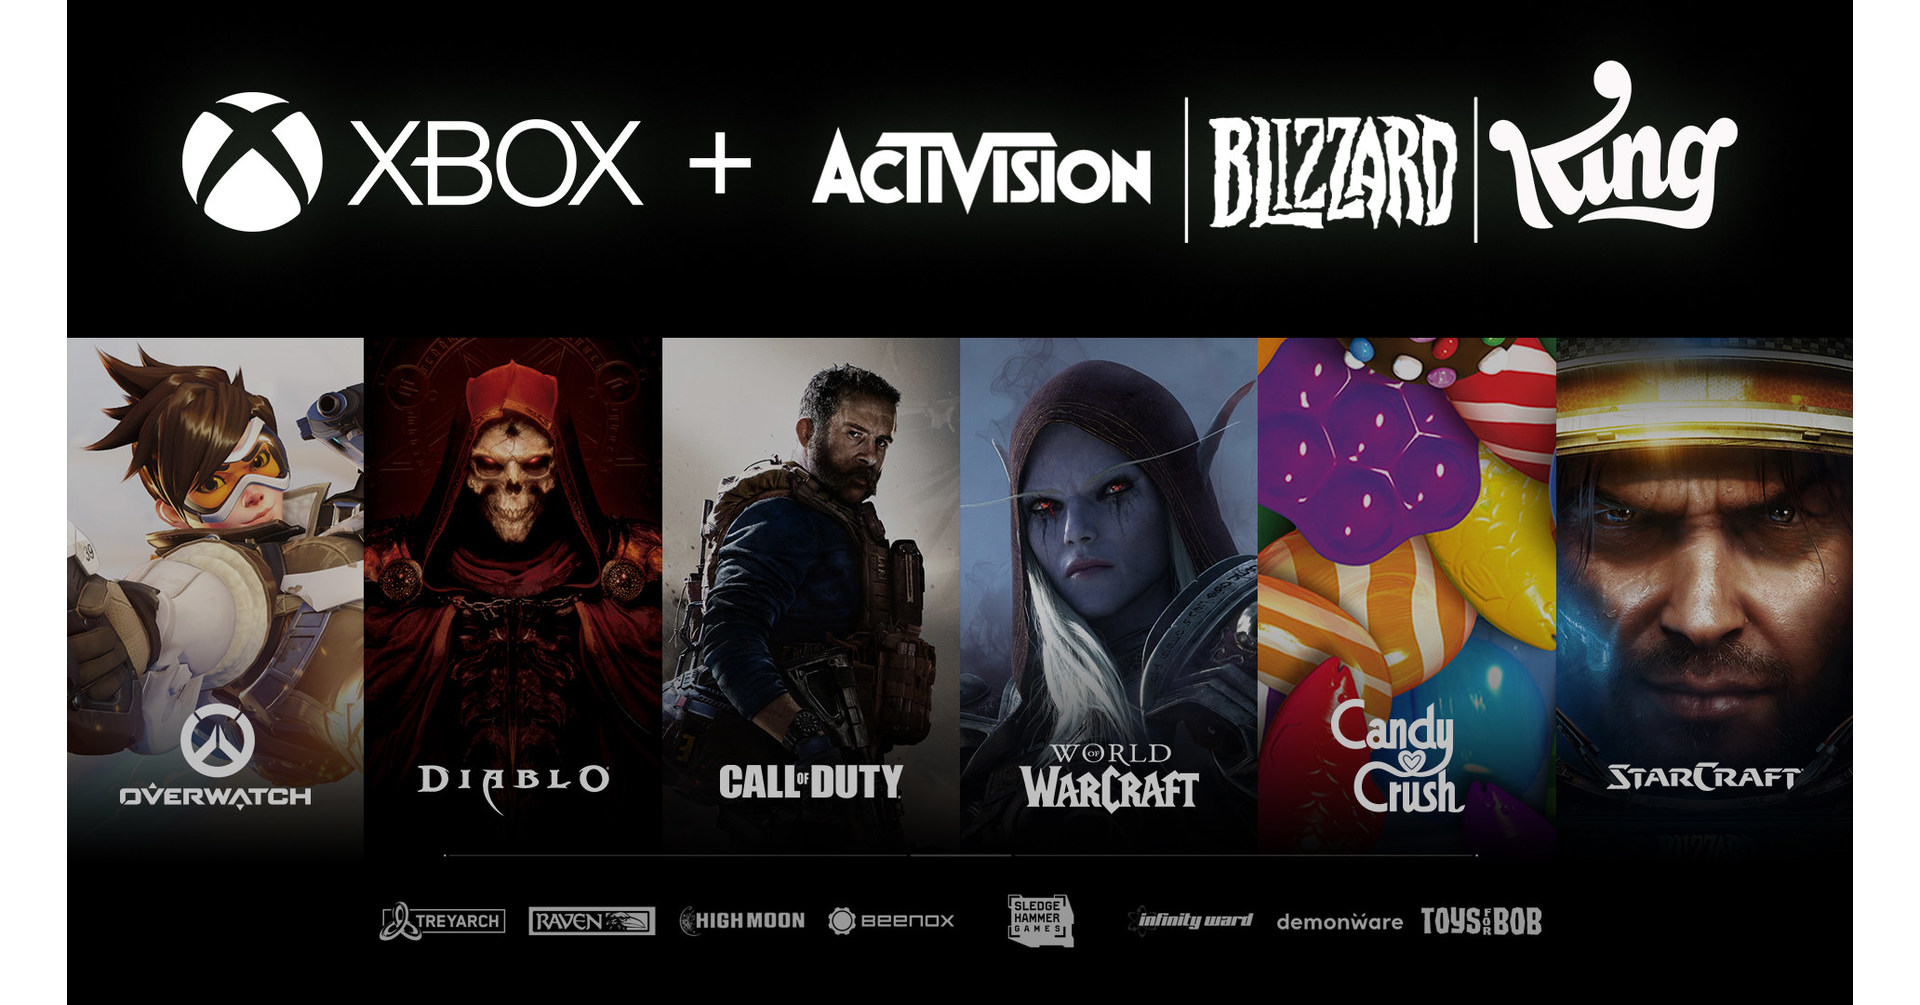 Microsoft to acquire Activision Blizzard to bring the joy and community of gaming to everyone, across every device - PRNewswire